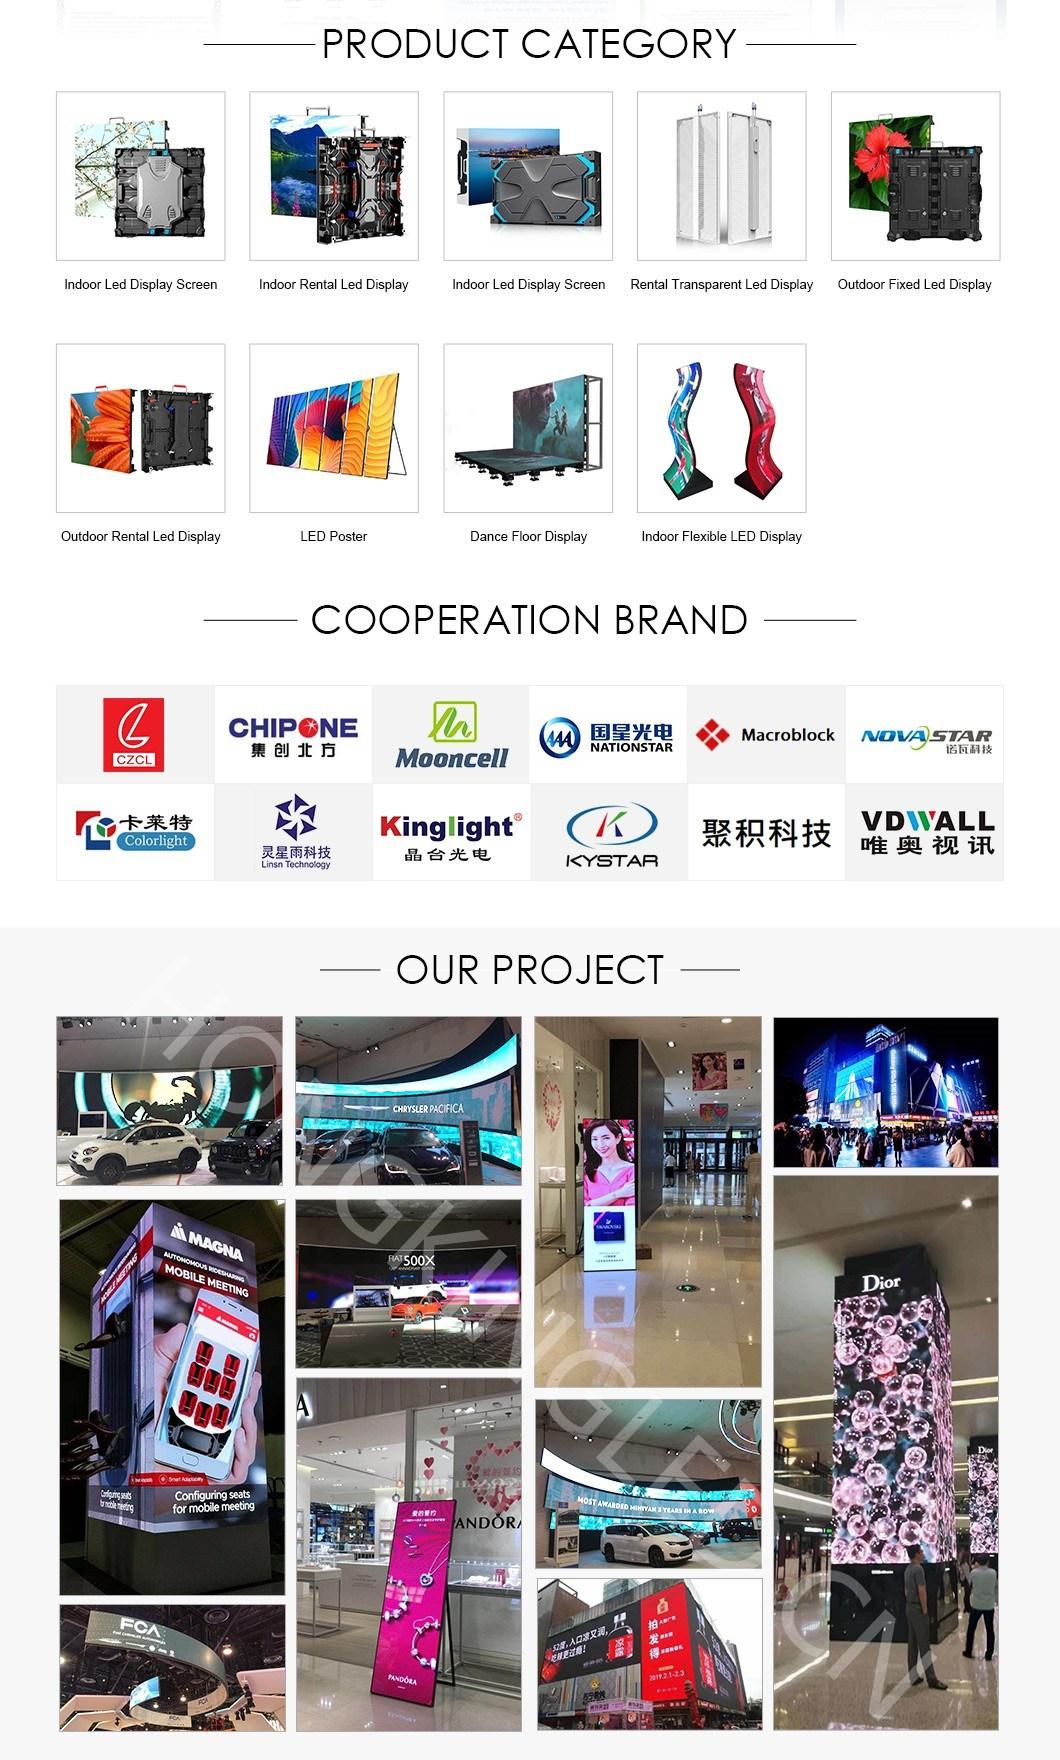 Superior Quality Advertising P5 Full Color Giant LED Sign Board